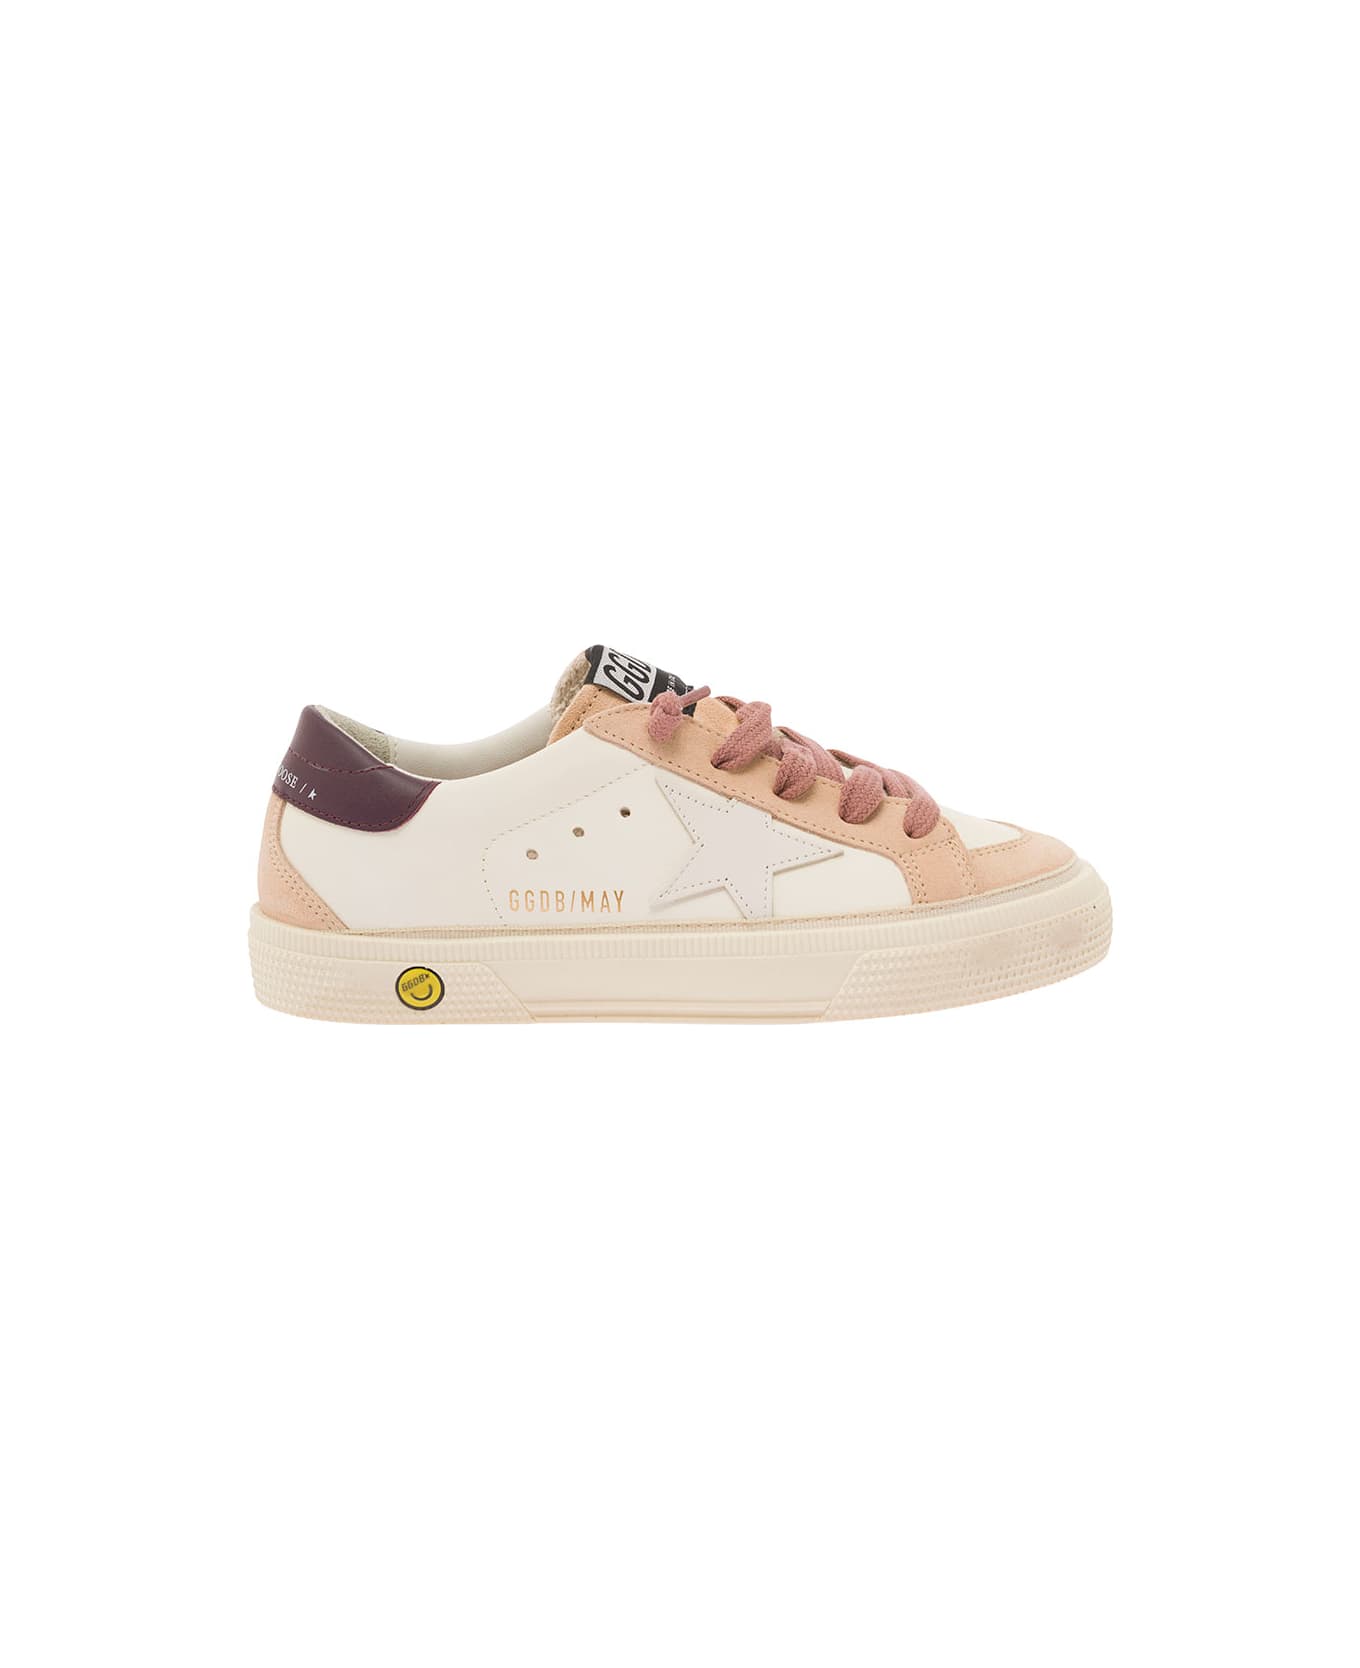 Golden Goose May Leather Upper Star And Heel Suede Toe And Spur Include Il Codice Gyf00604 | F004879 -82413 Dal 28 Al 35 - Beige シューズ